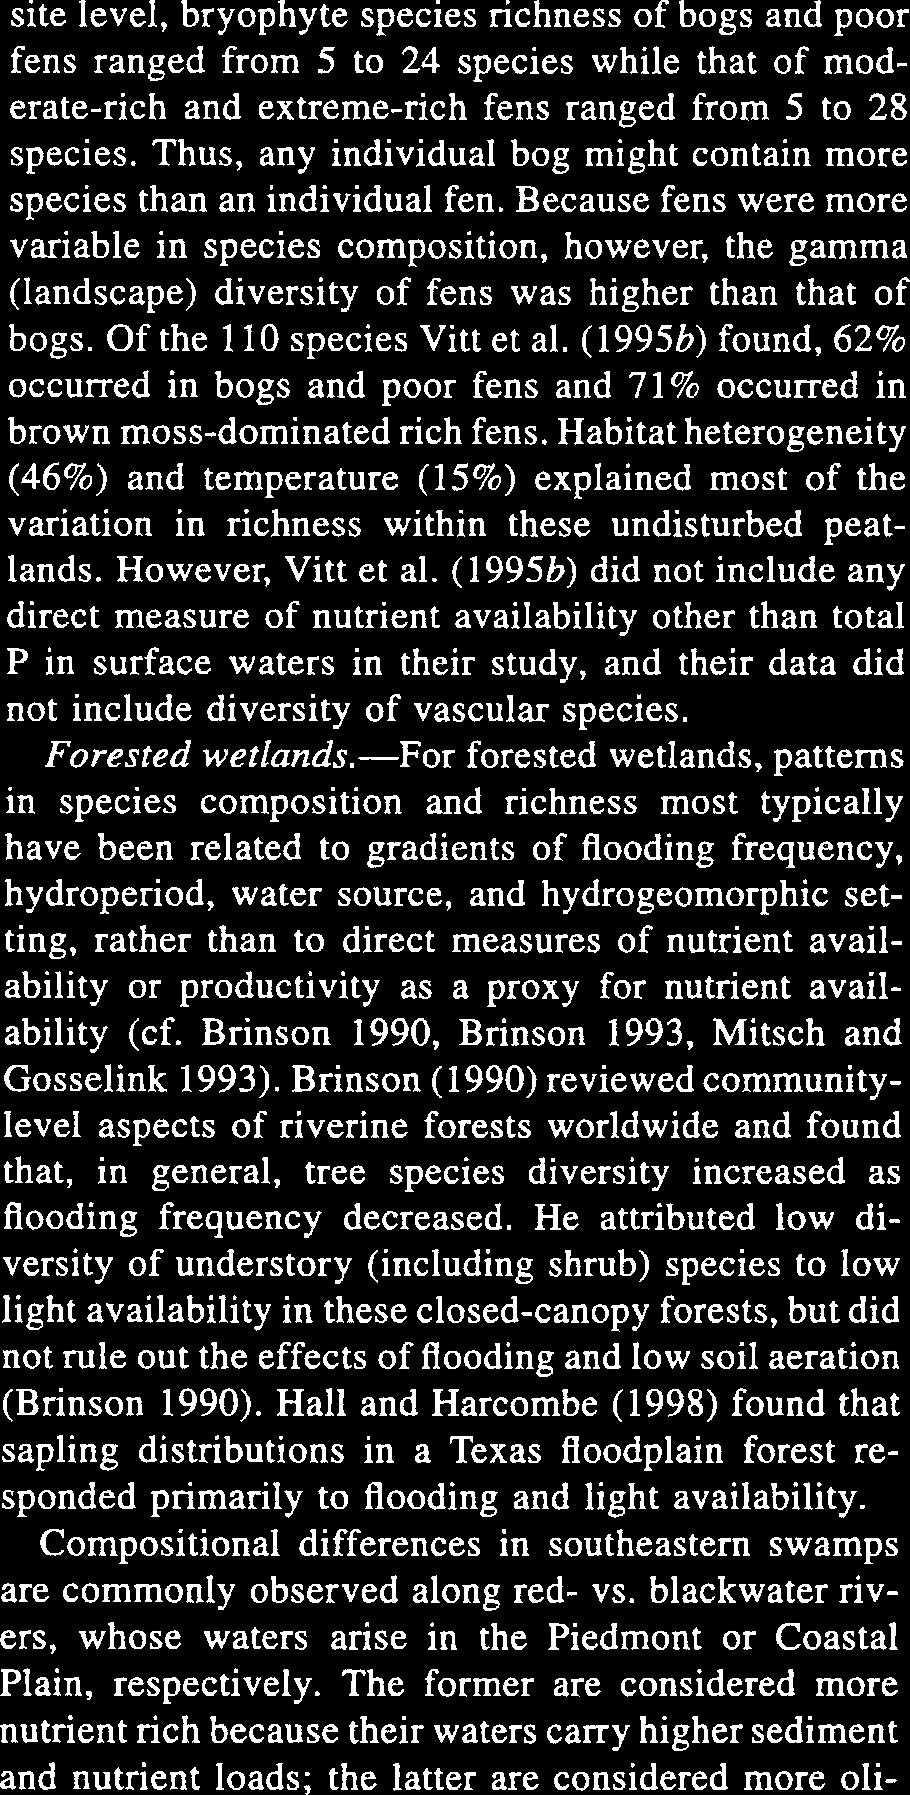 2158 BARBARA L. BEDFORD ET AL. Ecology, Vol. 80, No. 7 FIG. 2. Species richness of vascular plants and bryophytes plotted against the ph of surface waters in 19 New York (USA) fens.